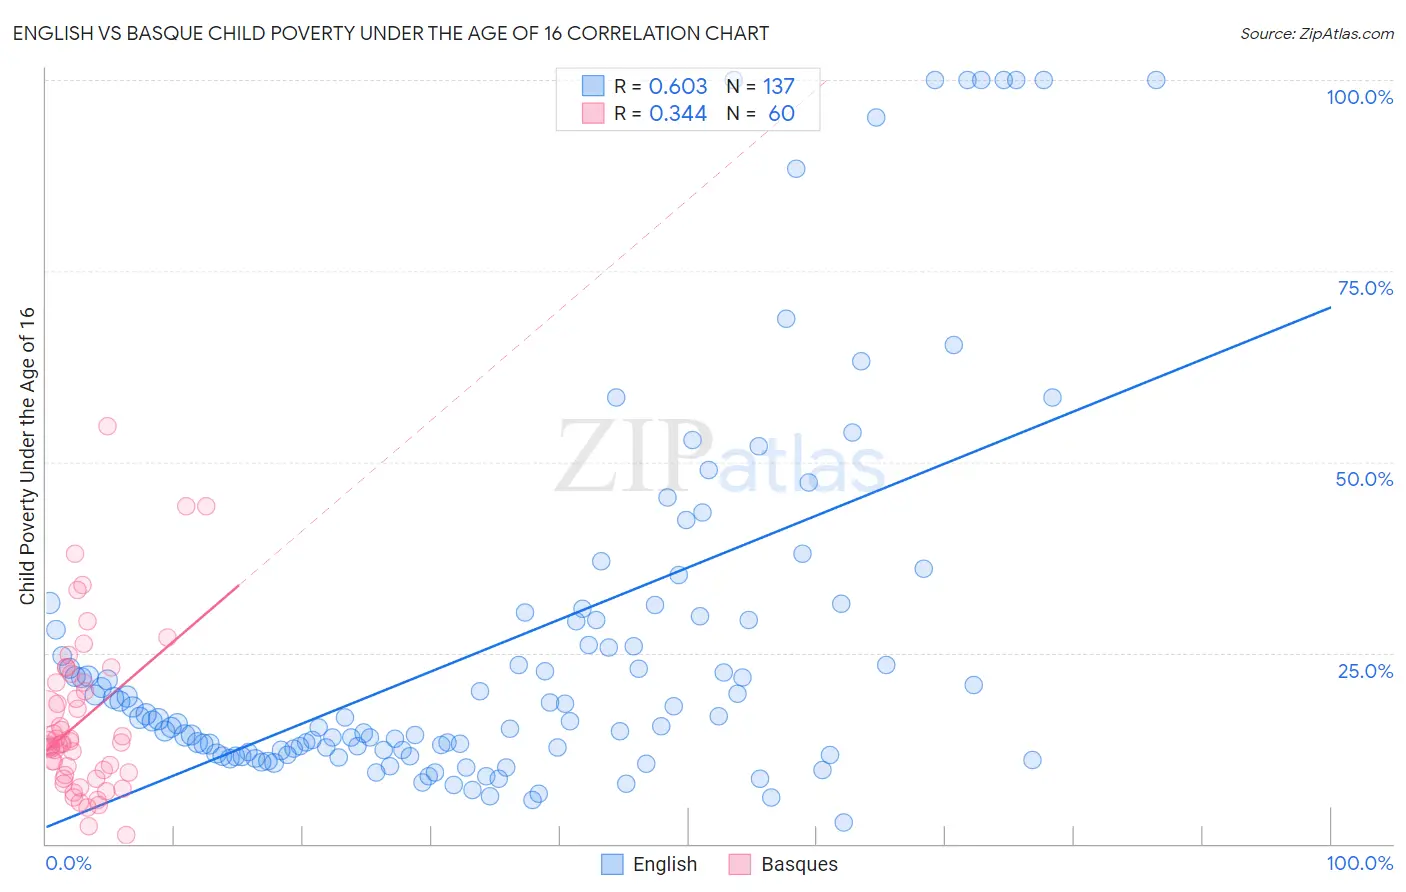 English vs Basque Child Poverty Under the Age of 16